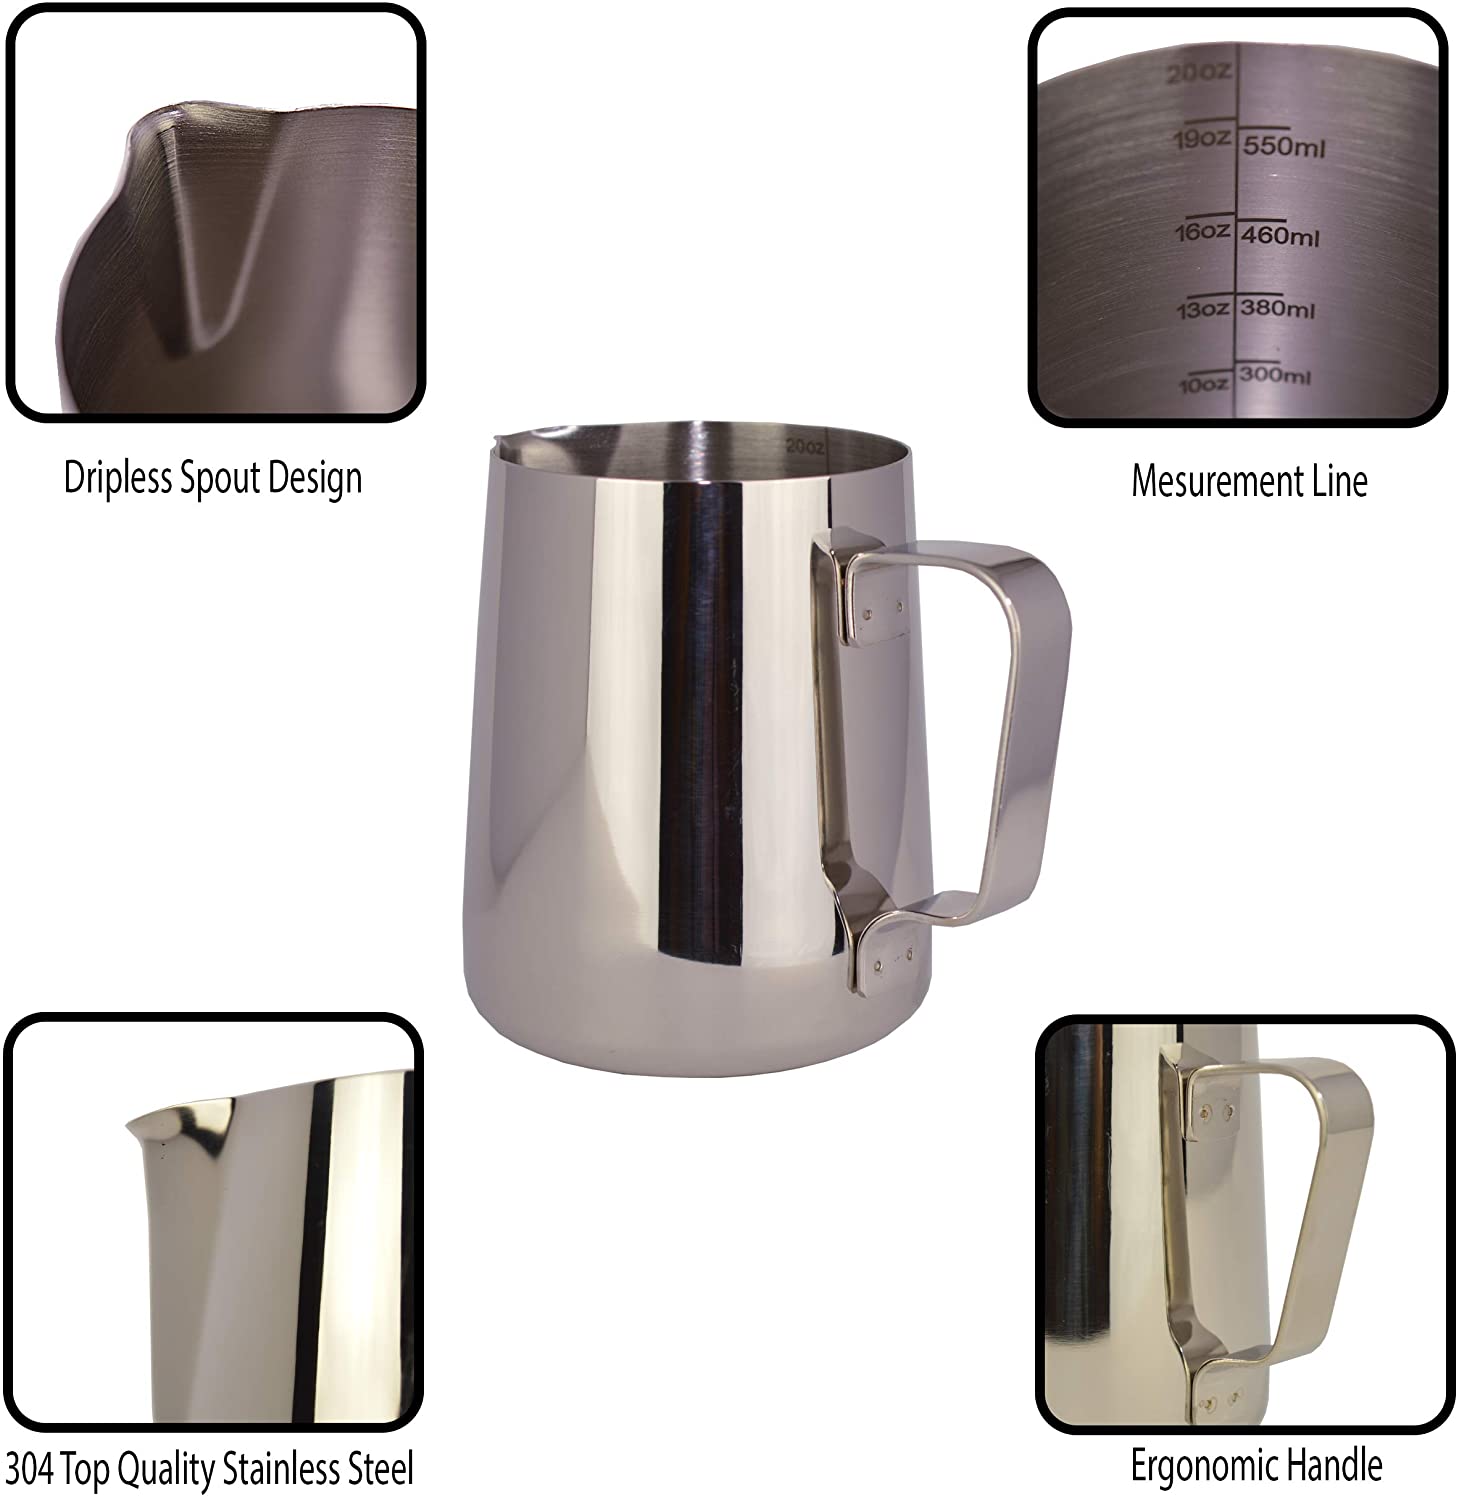 Milk Frothing Pitcher 600ml - Stainless Steel